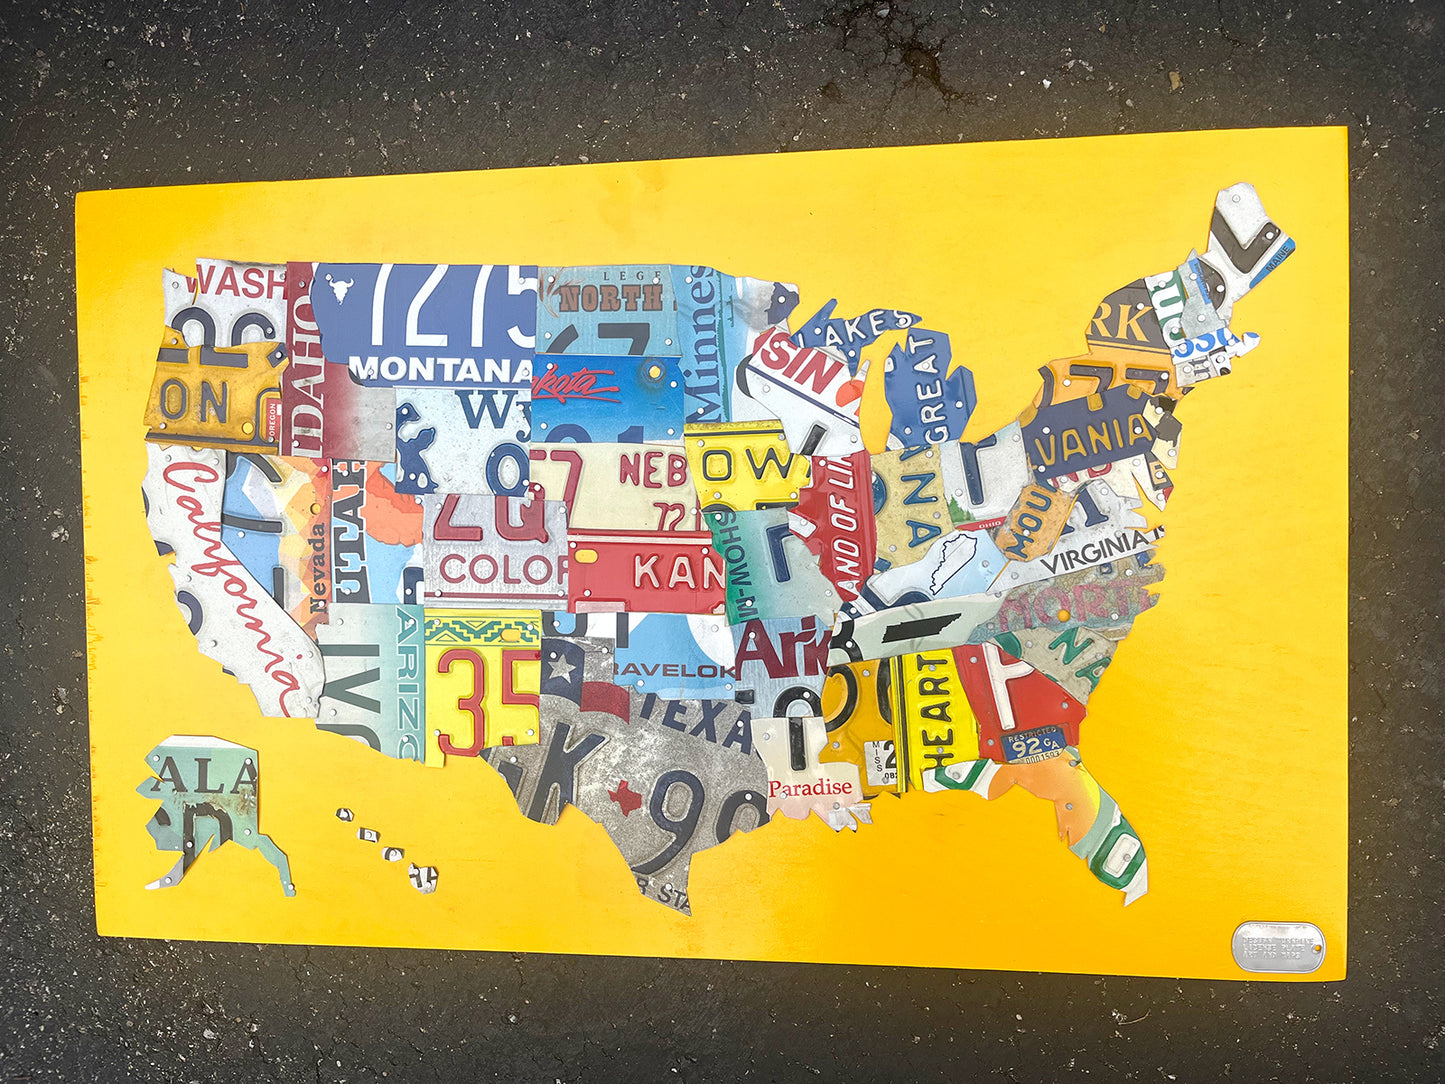 USA Map on Yellow Maple 28 x 18